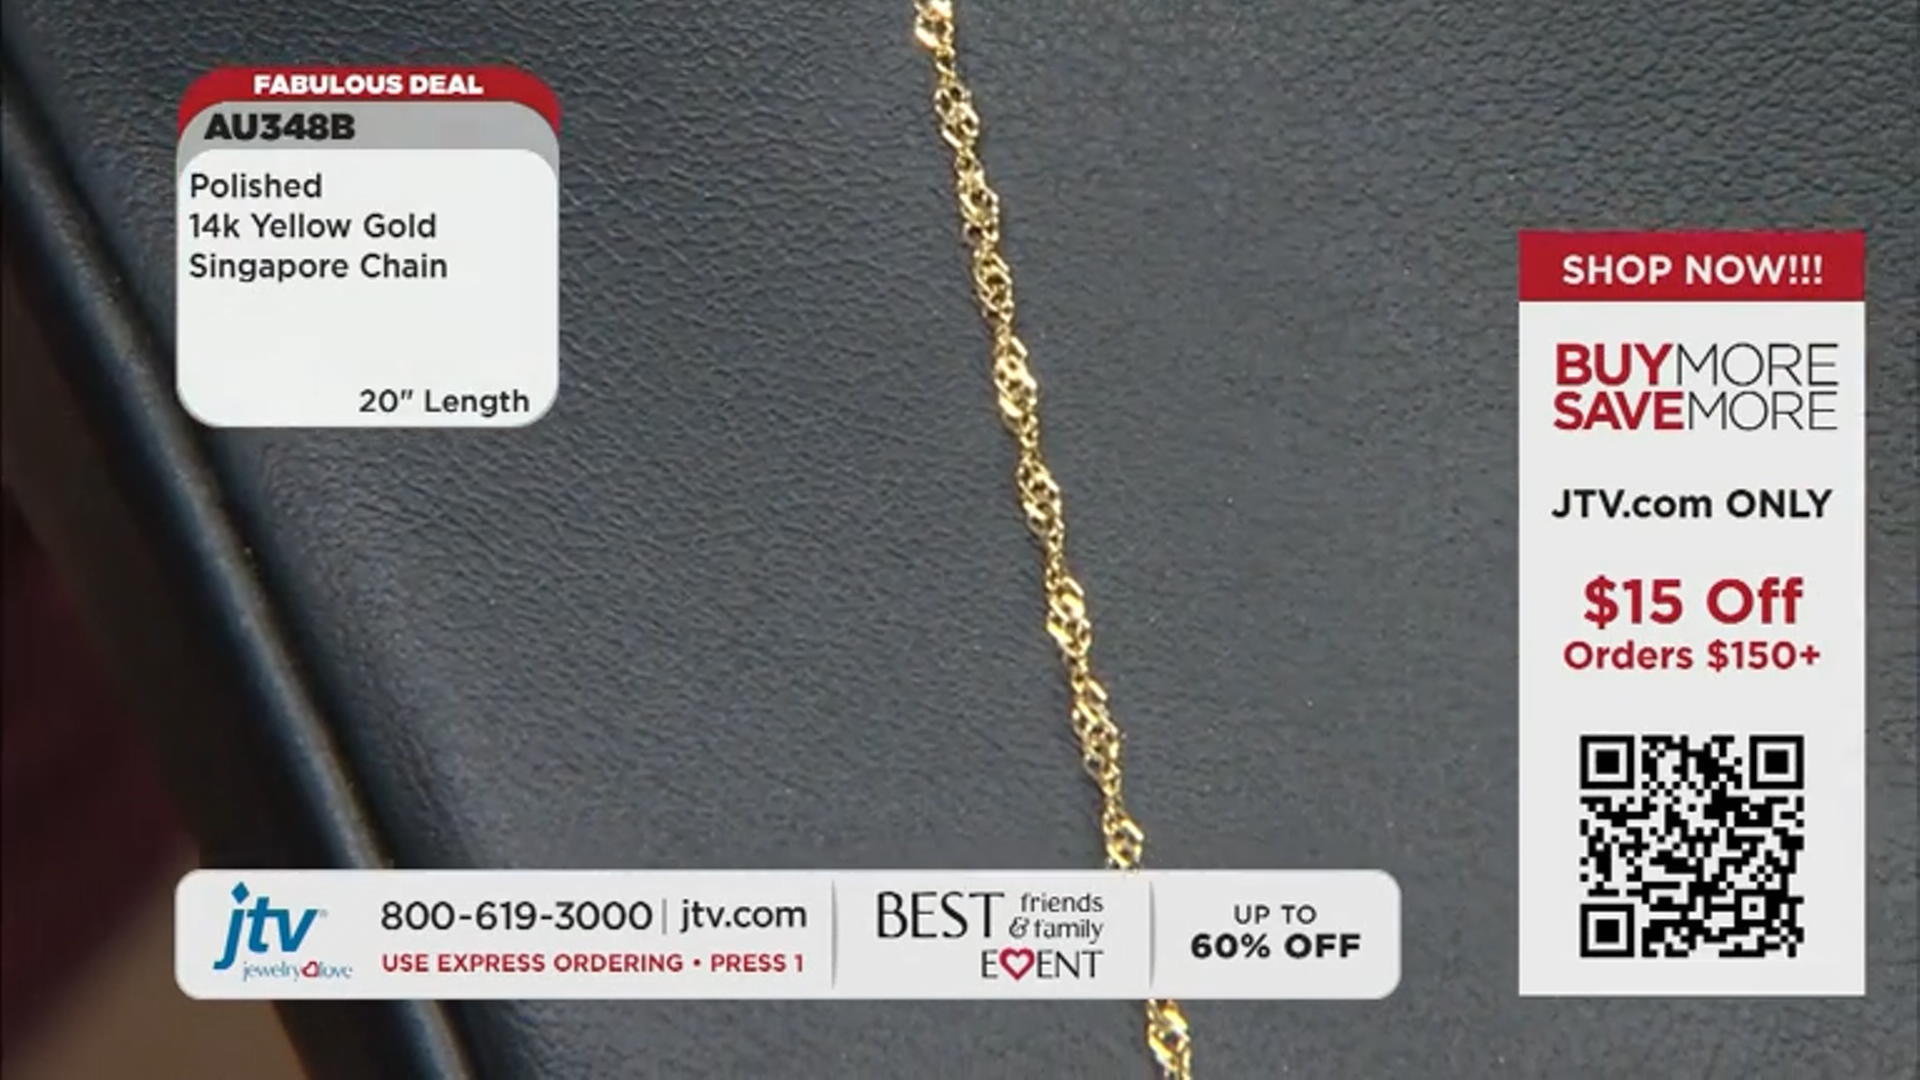 14K Yellow Gold Polished 20 Inch Singapore Chain Video Thumbnail